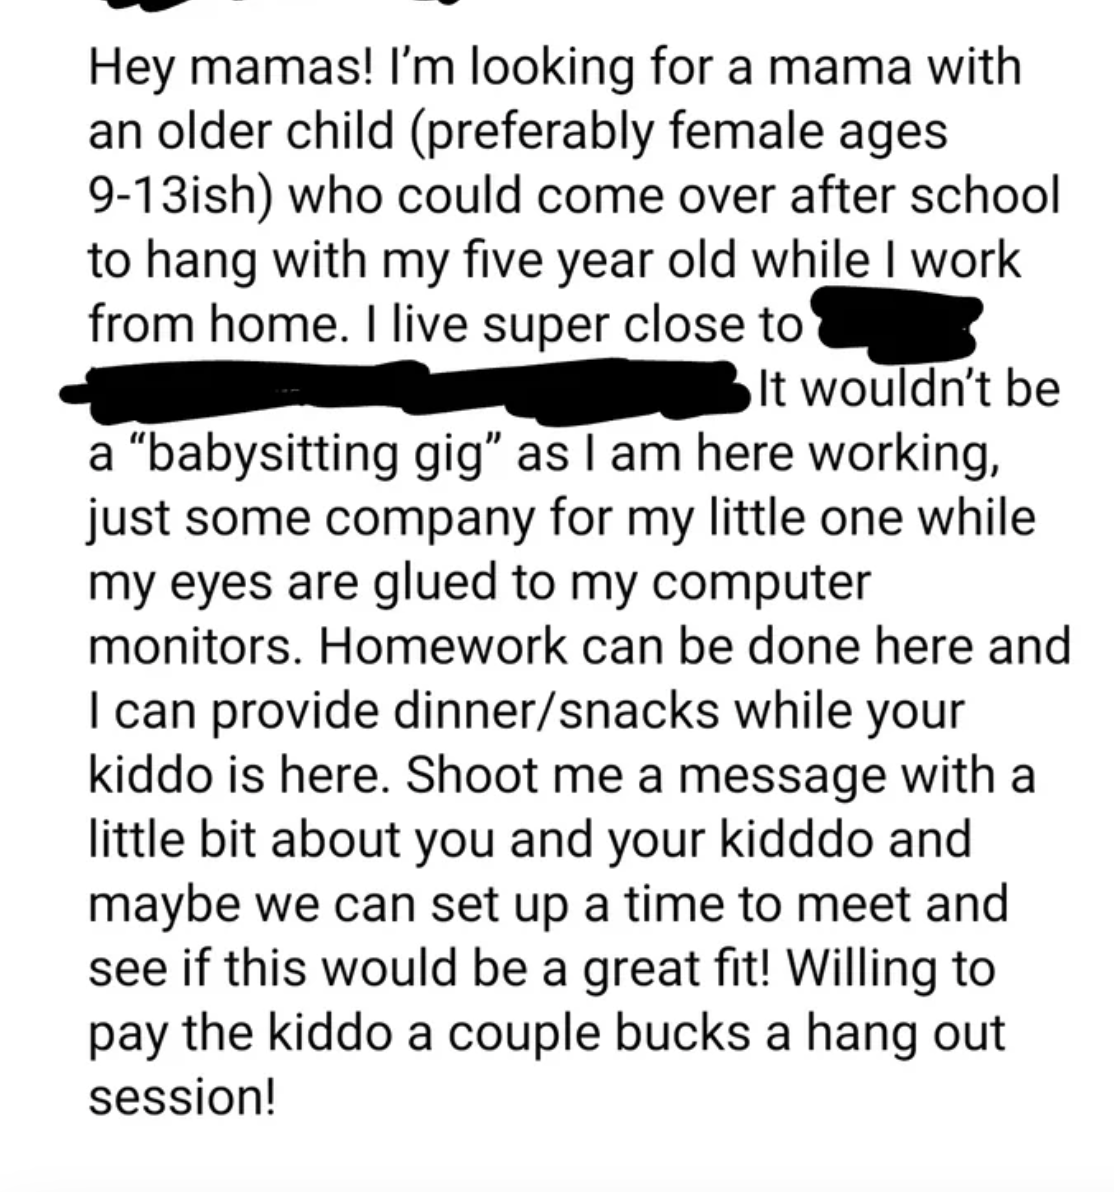 &quot;Willing to pay the kiddo a couple bucks a hang out session!&quot;